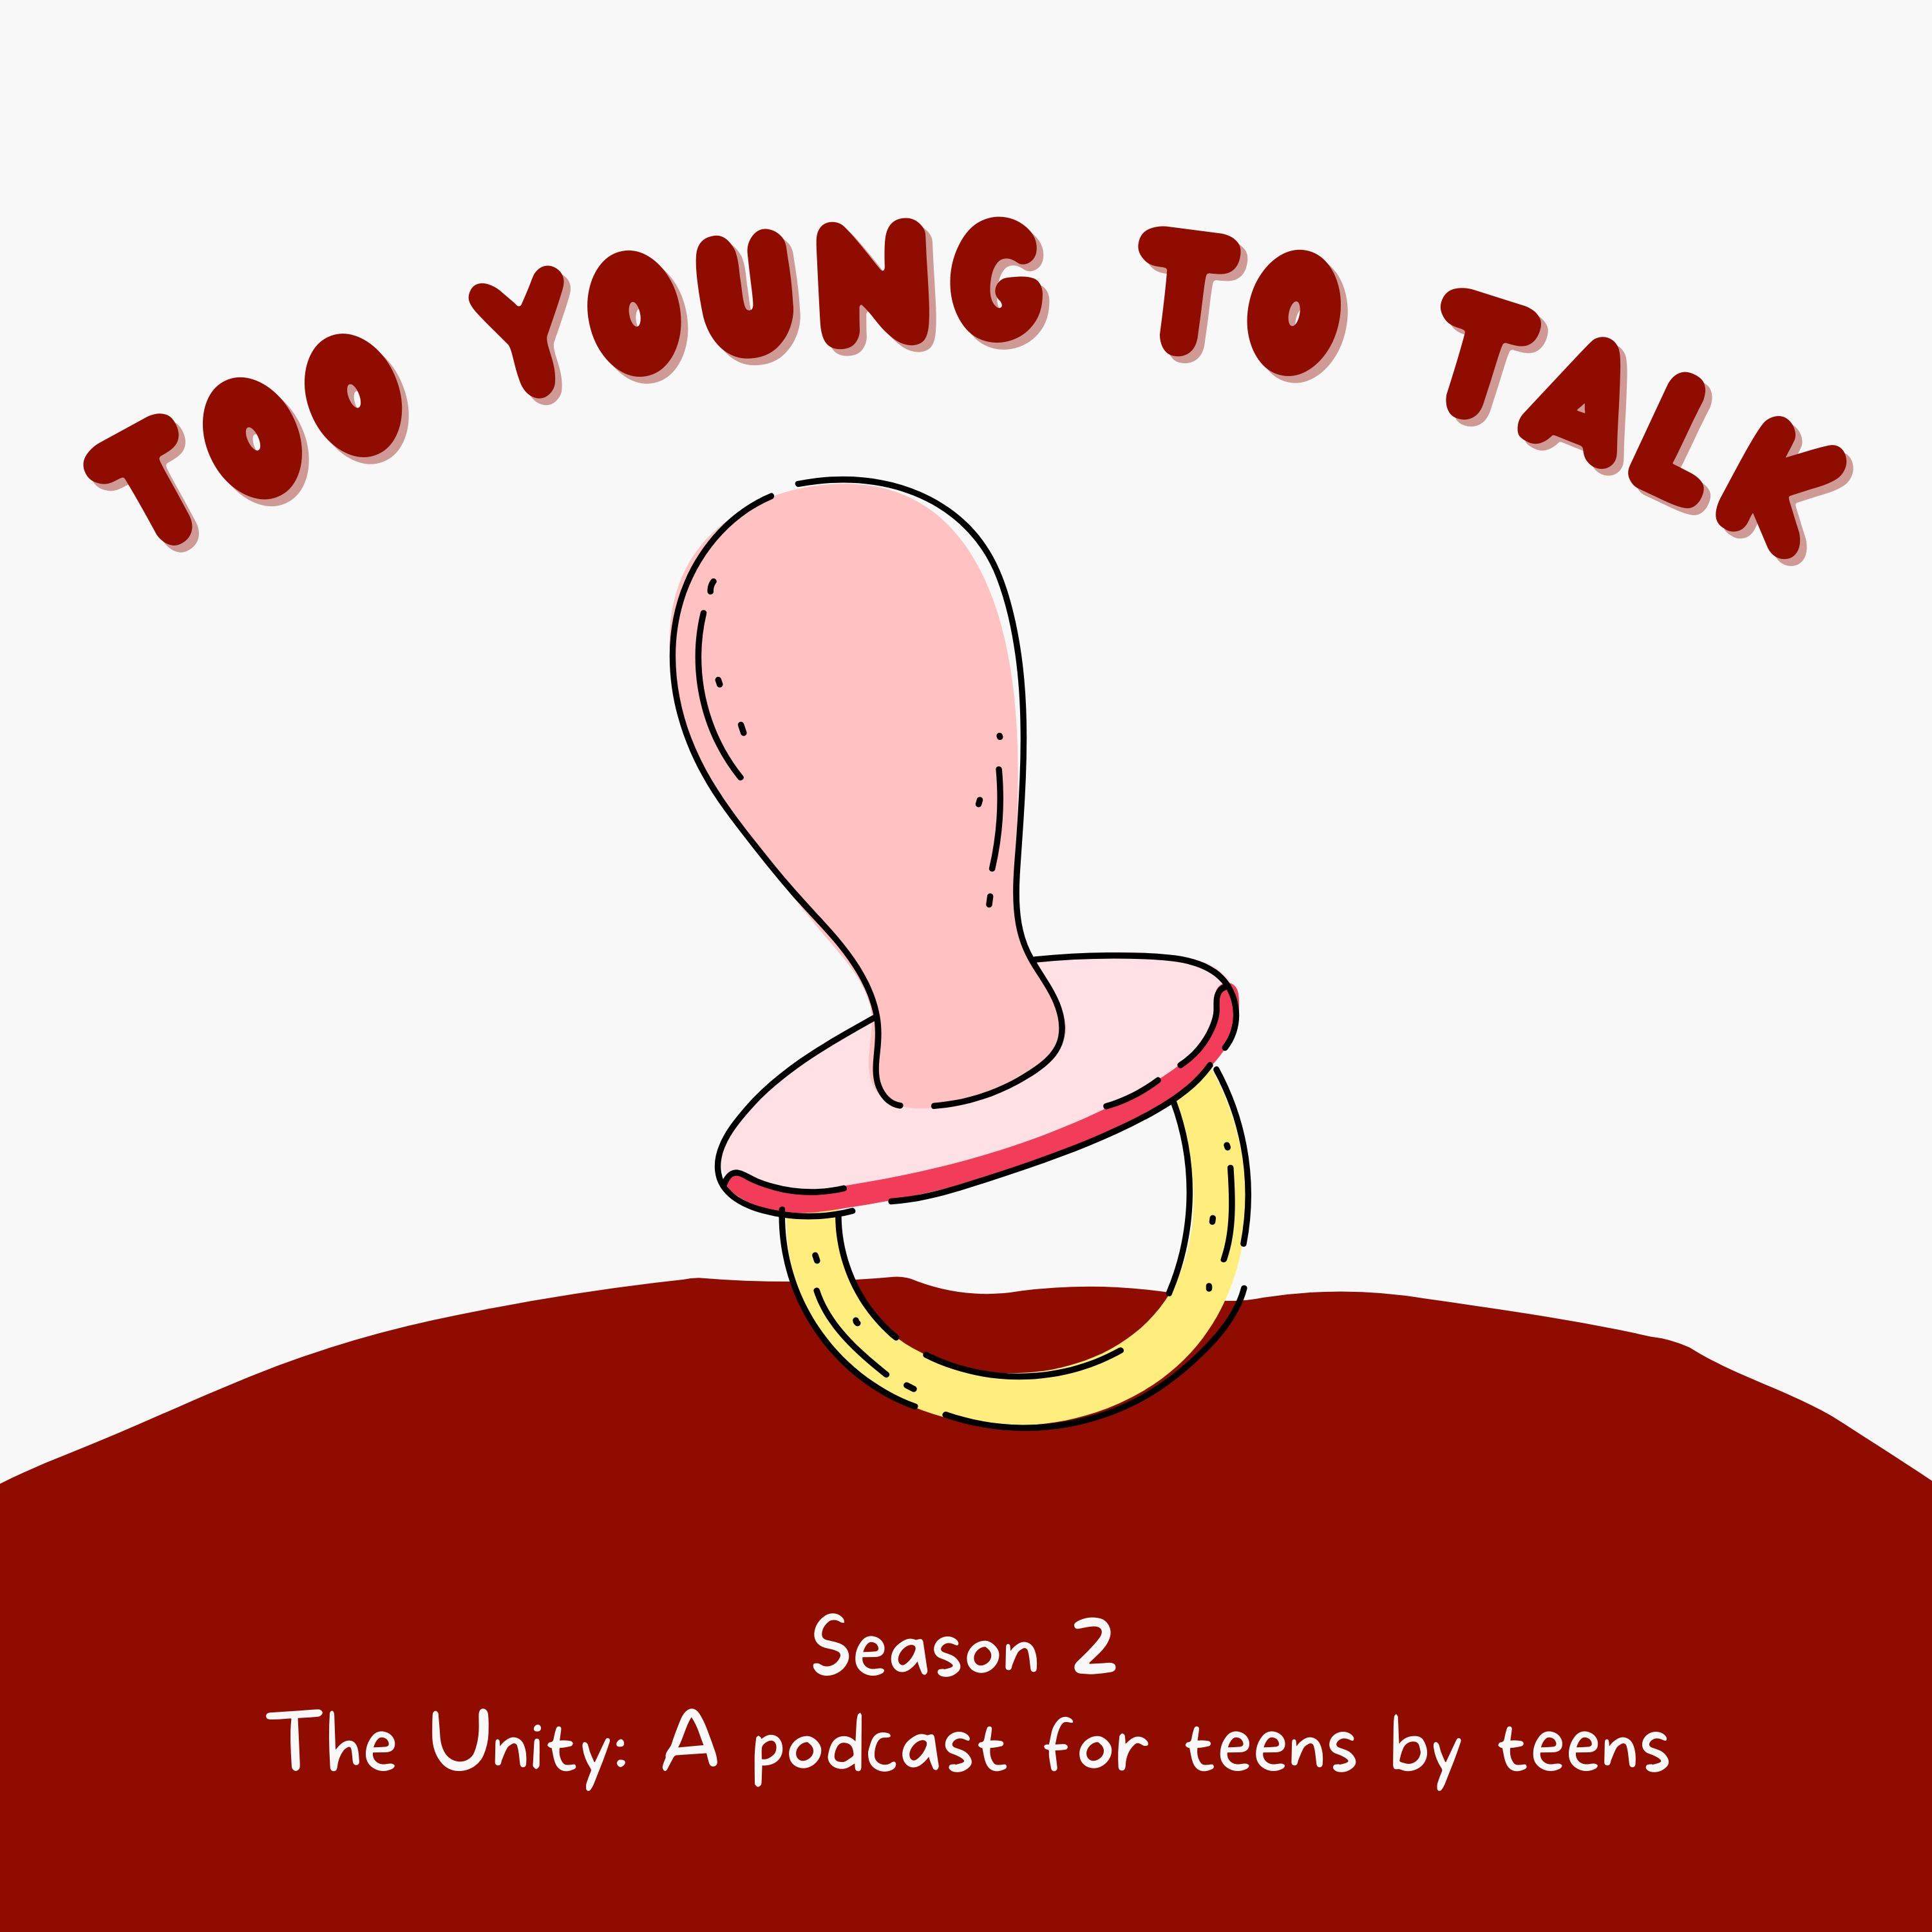 The Unity: A Podcast for Teens by Teens